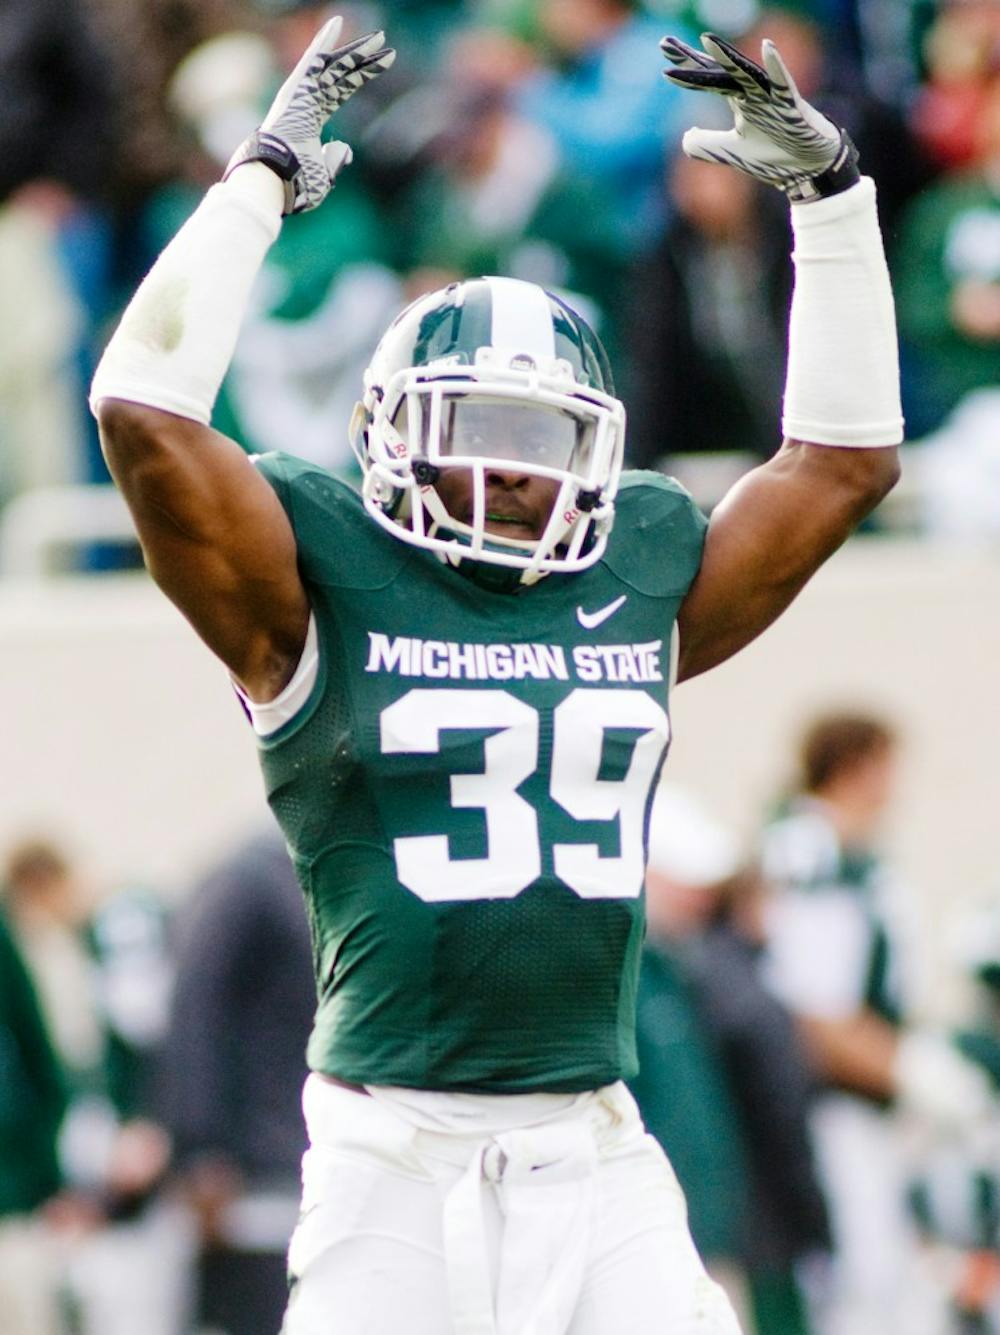 Junior safety Trenton Robinson looks to the crowd for support during the final quarter of the Spartans' last home game of the season last year on November 20, 2010 at Spartan Stadium.  The Spartans rallied during the second half of the game against Purdue to defeat the Boilermakers, 35-31. State News file photo